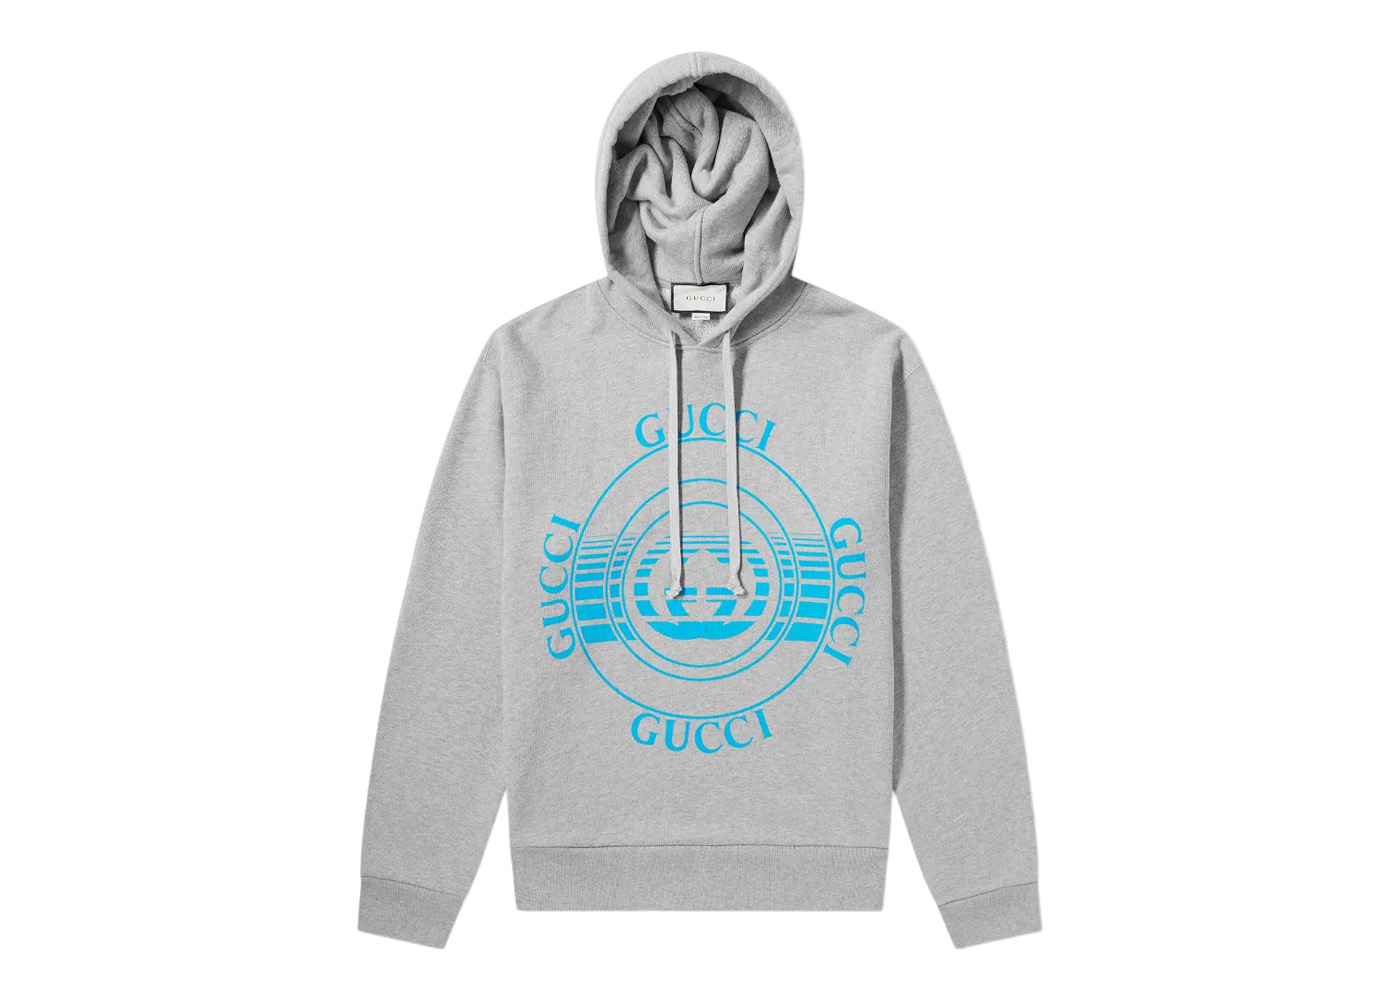 Gucci Record Print Pullover Hoodie Grey Marl/Blue